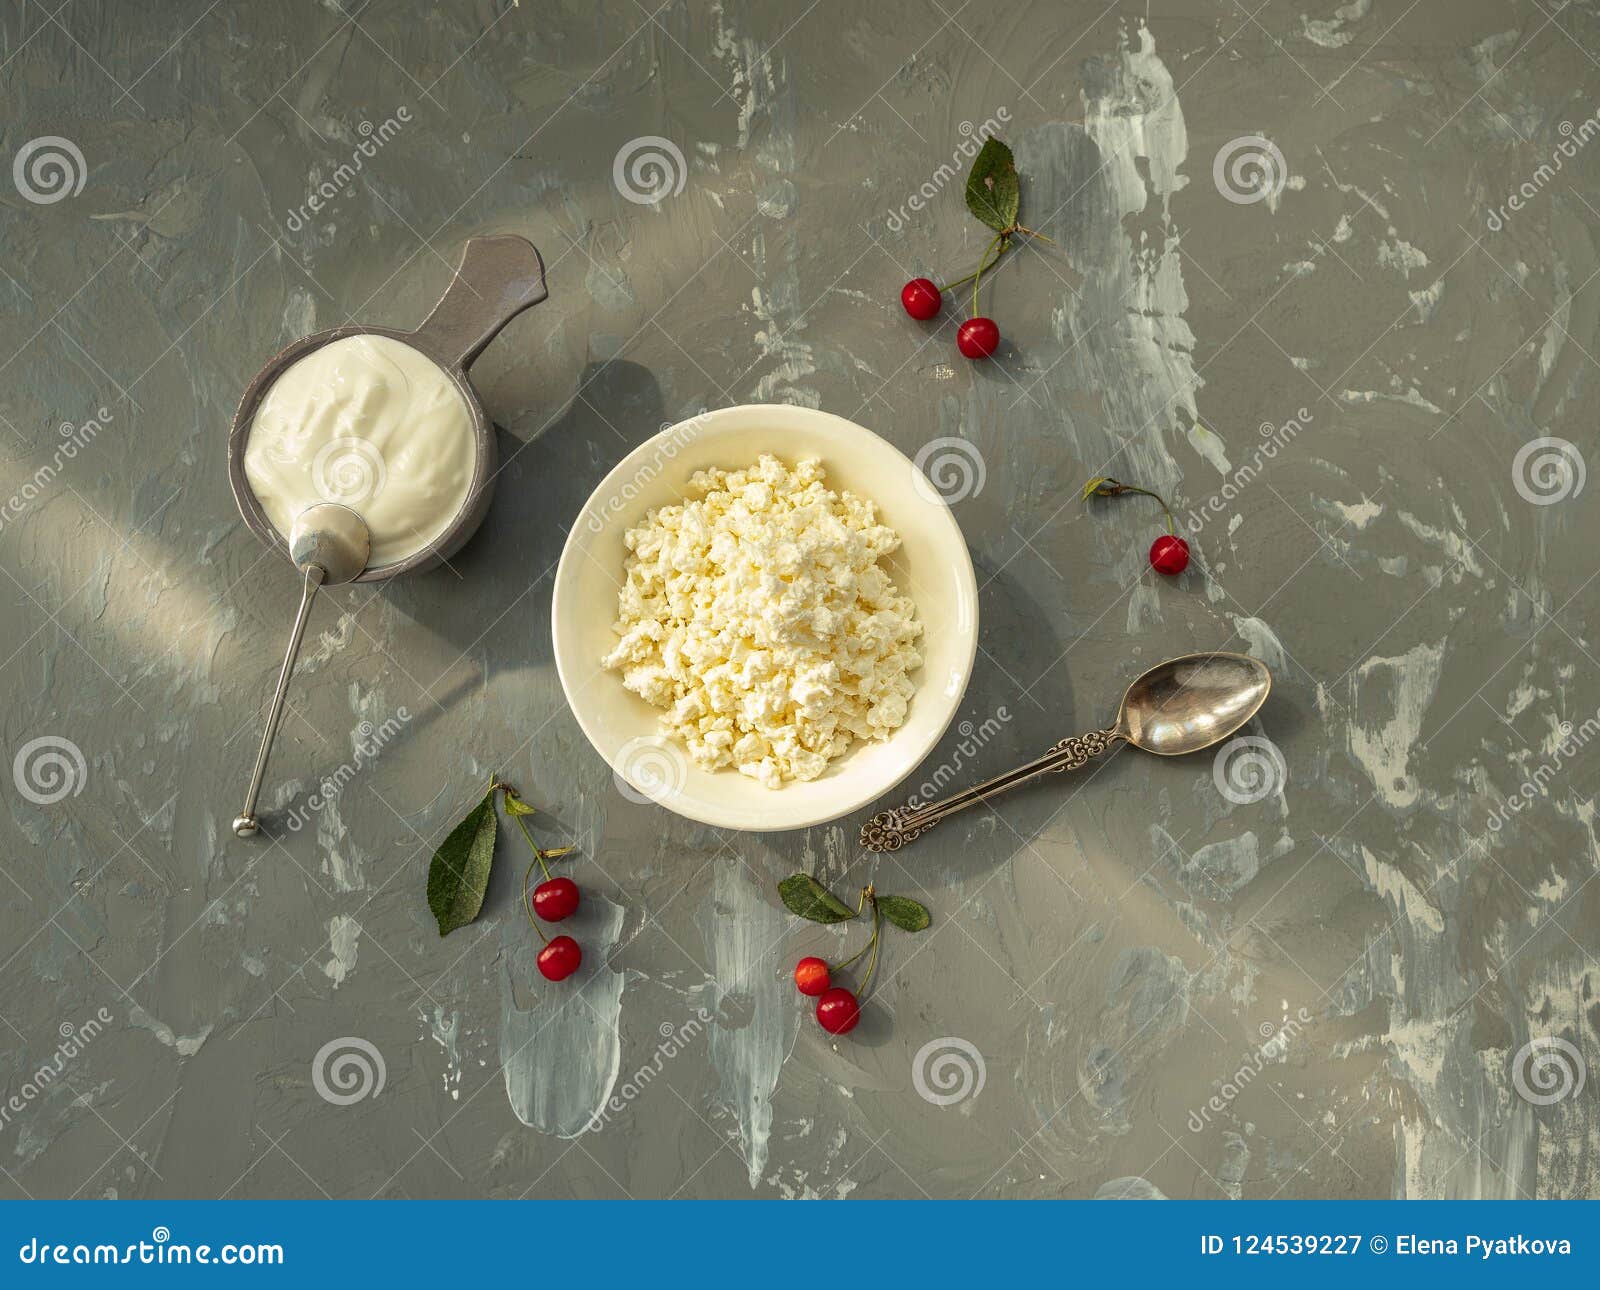 Cottage Cheese In A Bowl Change In A Klemanka Spoon Stock Image